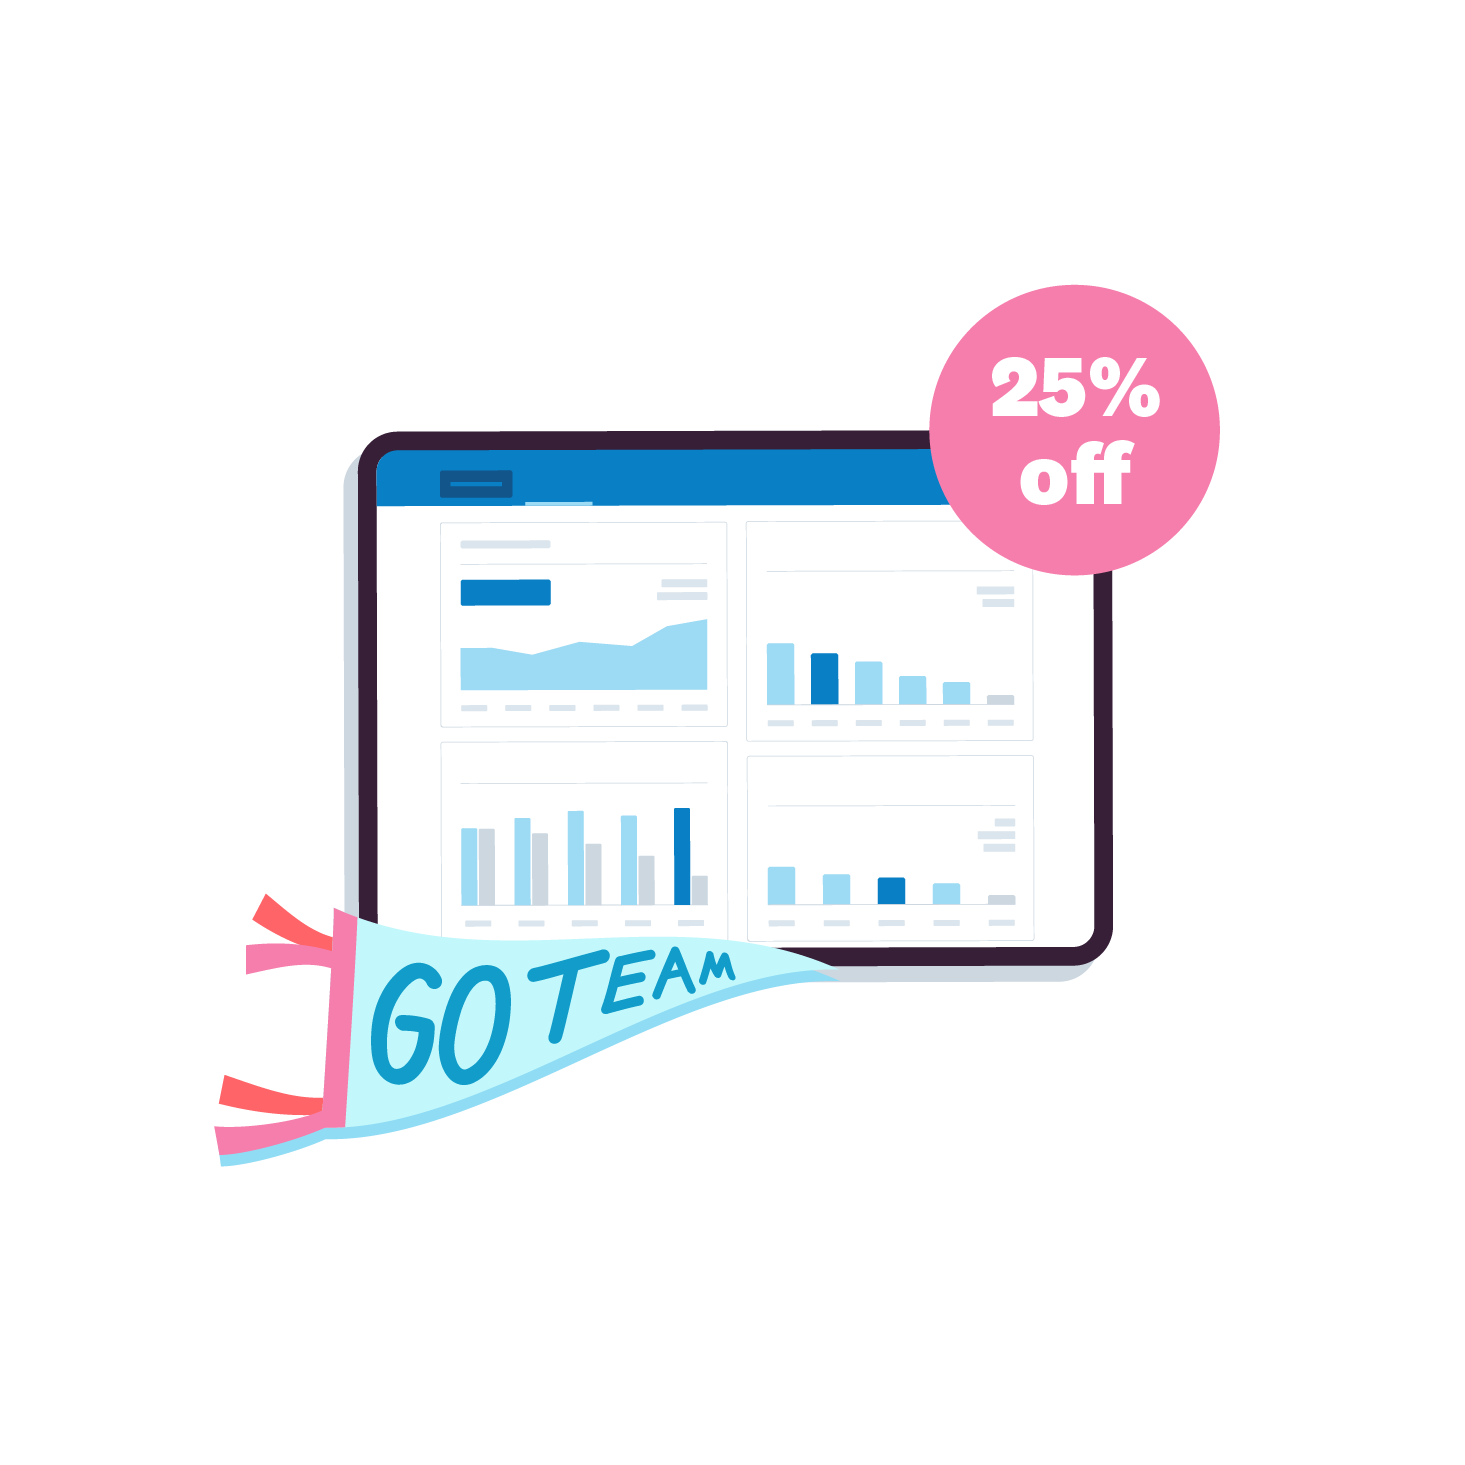 Charts on the Xero dashboard, a 25% off sign, and a banner that says ‘Go Team’